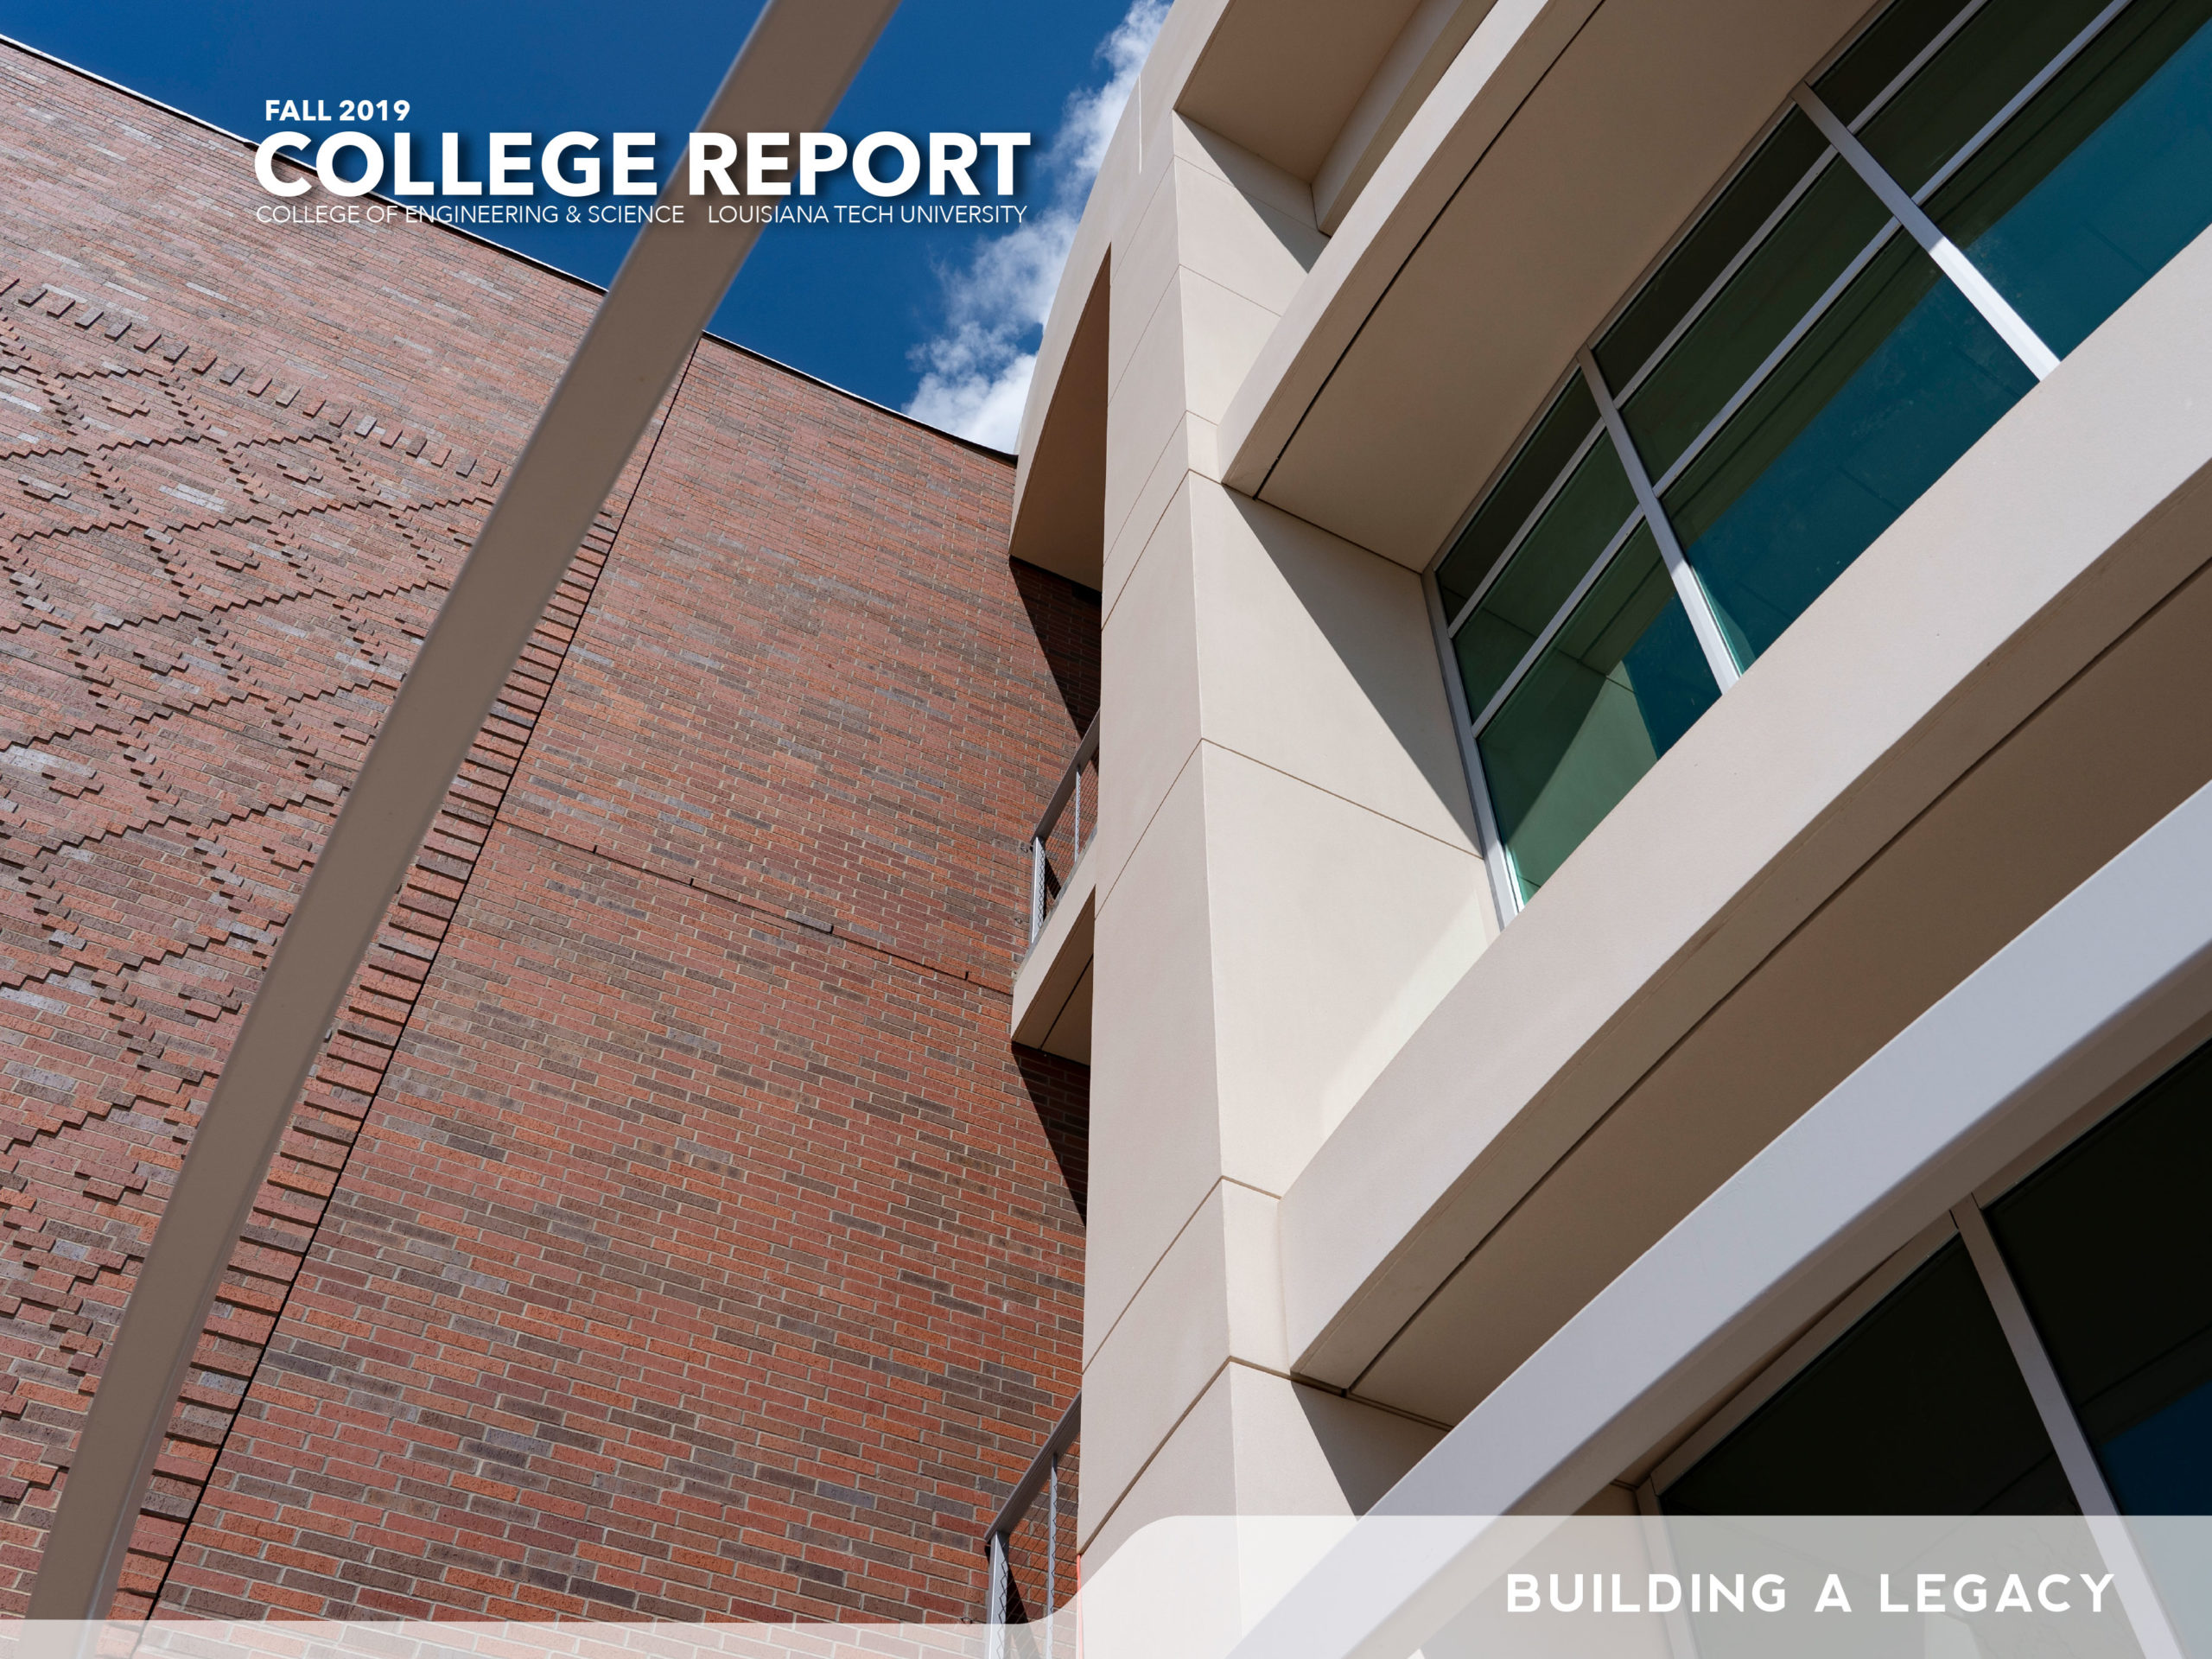 Fall 2019 College Report, College of Engineering and Science Louisiana Tech University